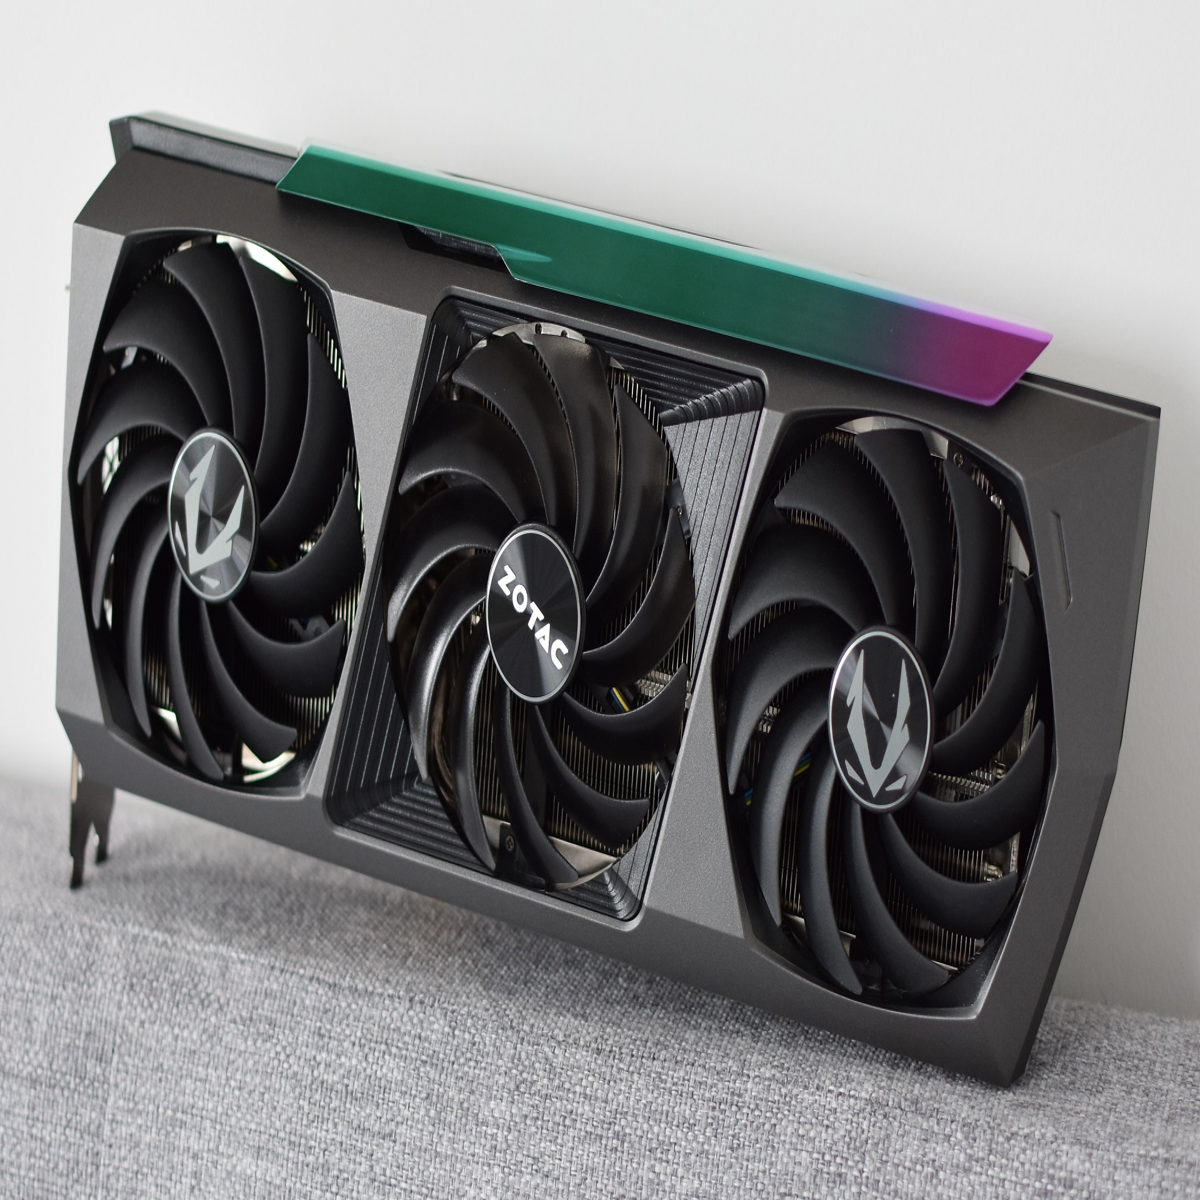 Watch Dogs Legion now recommends an RTX 3080 for its ultra